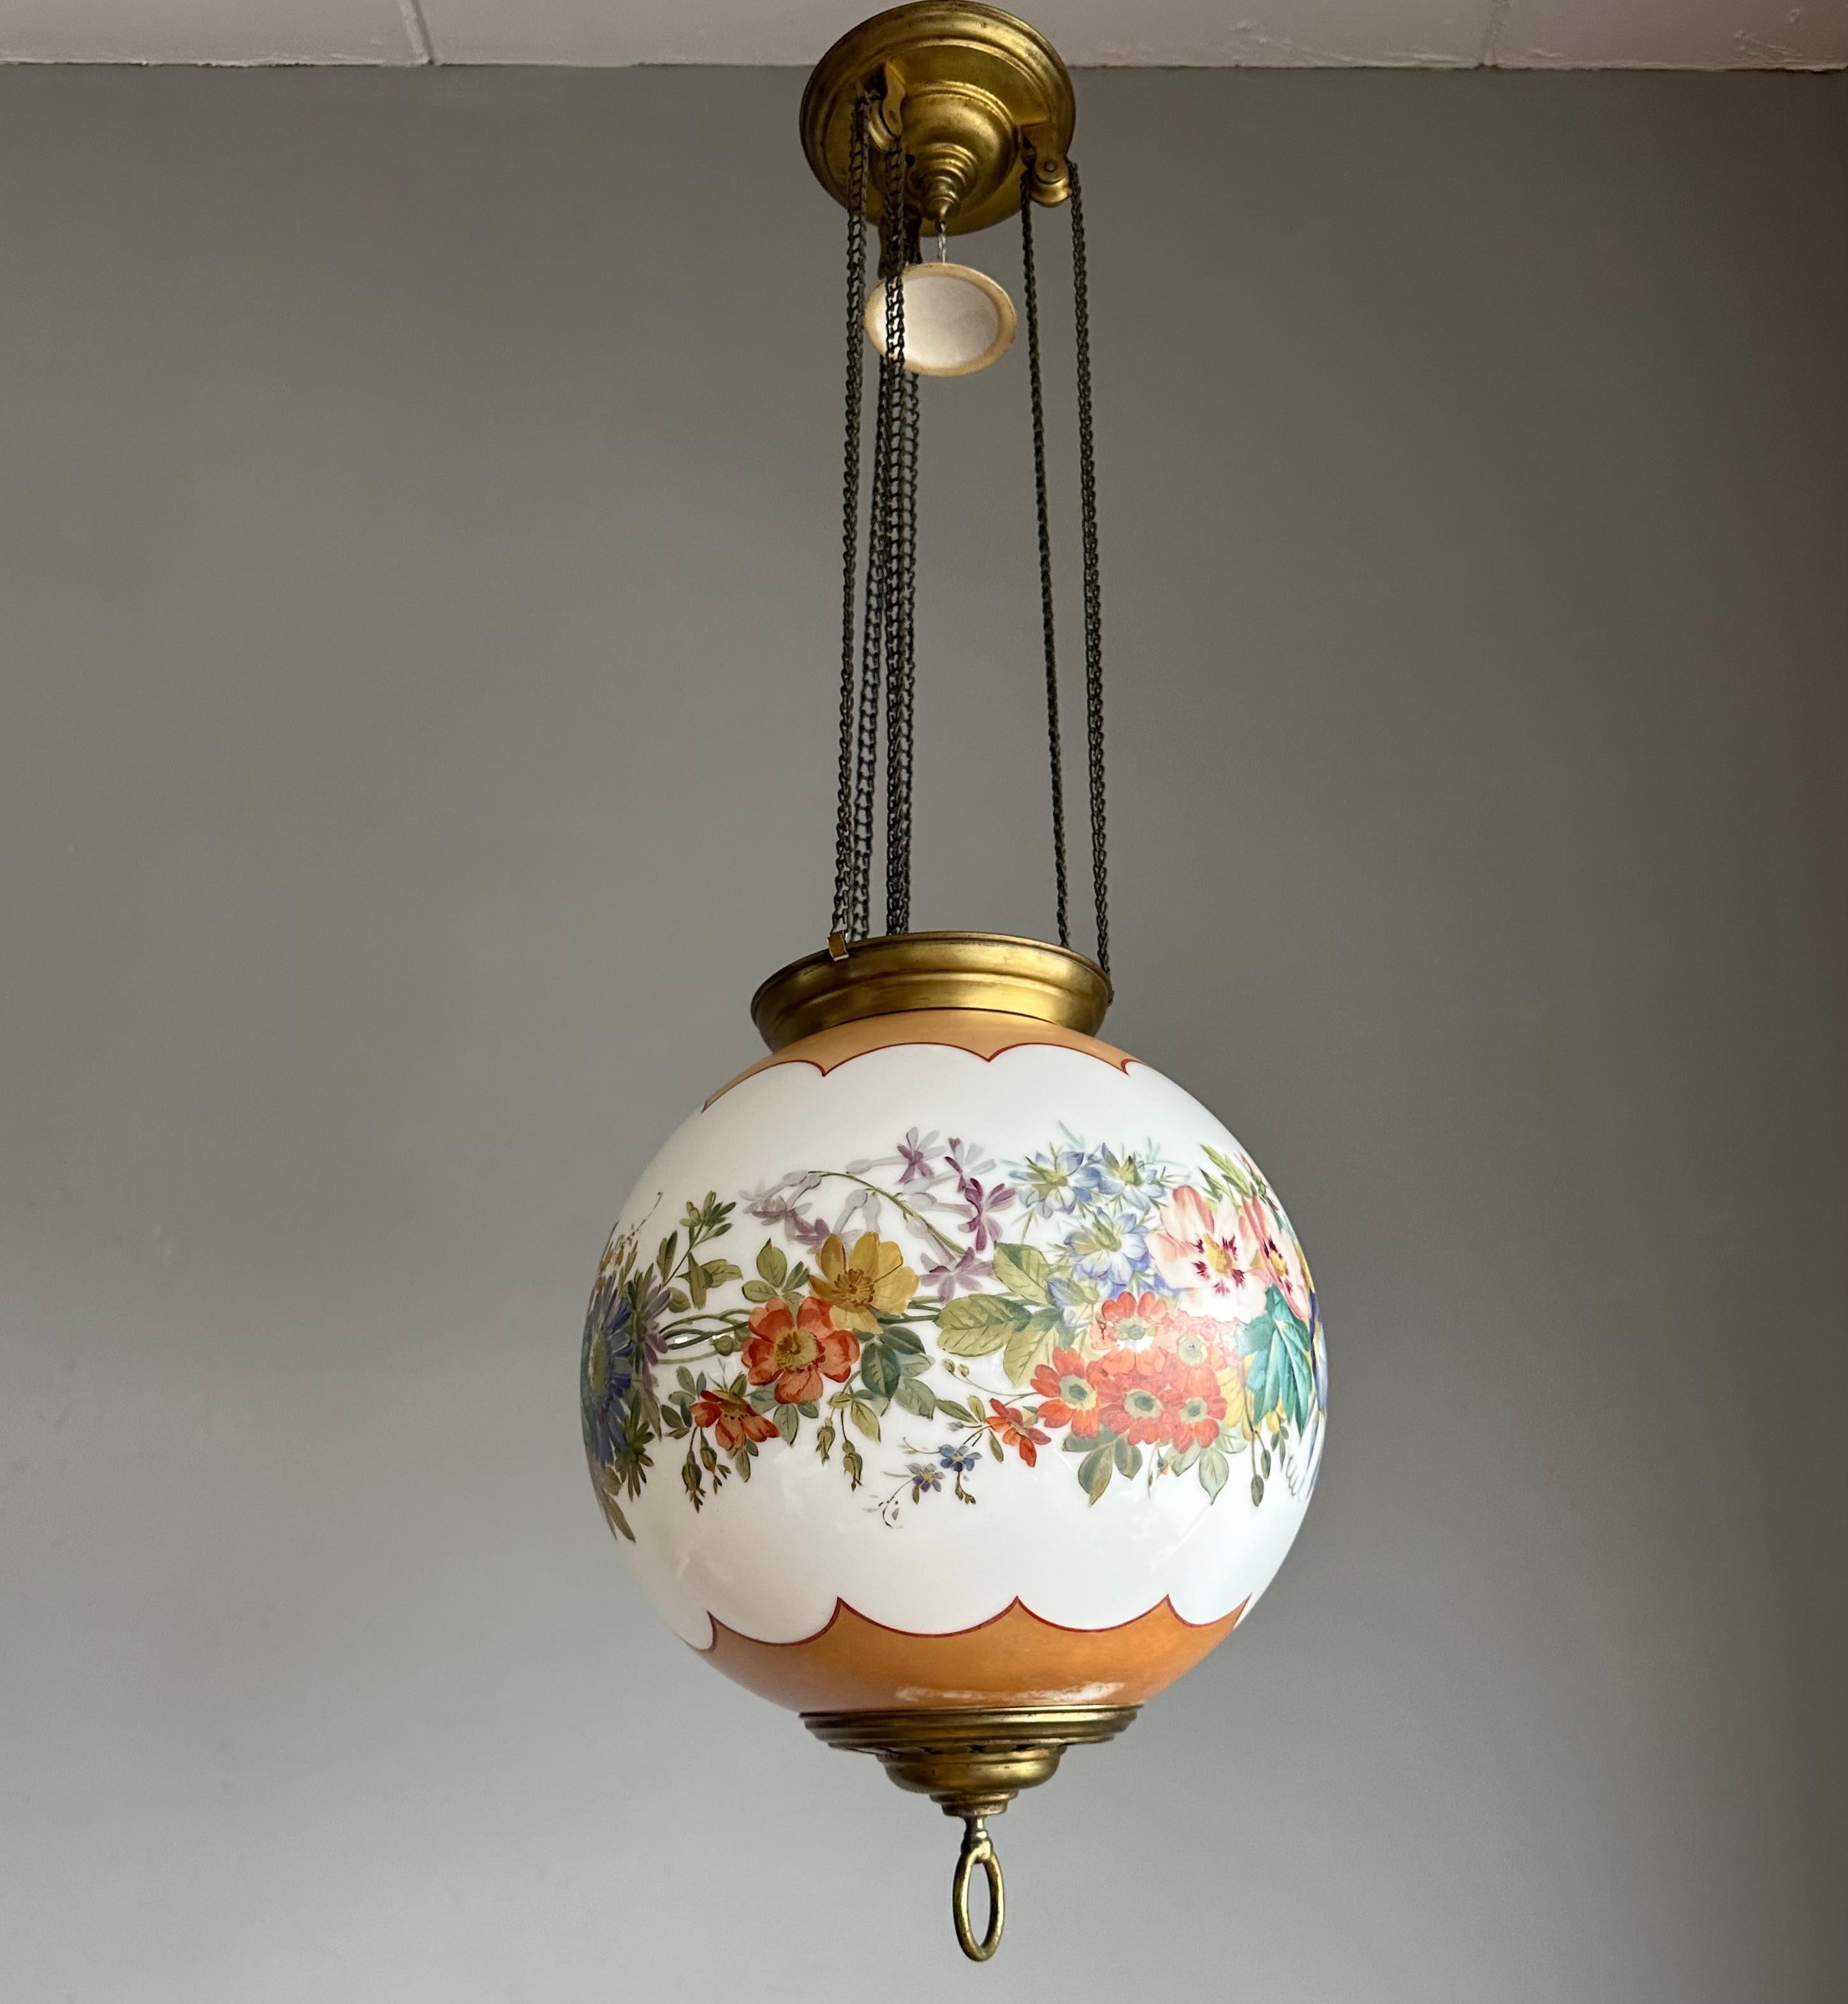 Antique Round Opaline Glass Shade Pendant Light with Wreath of Flowers Decor For Sale 5